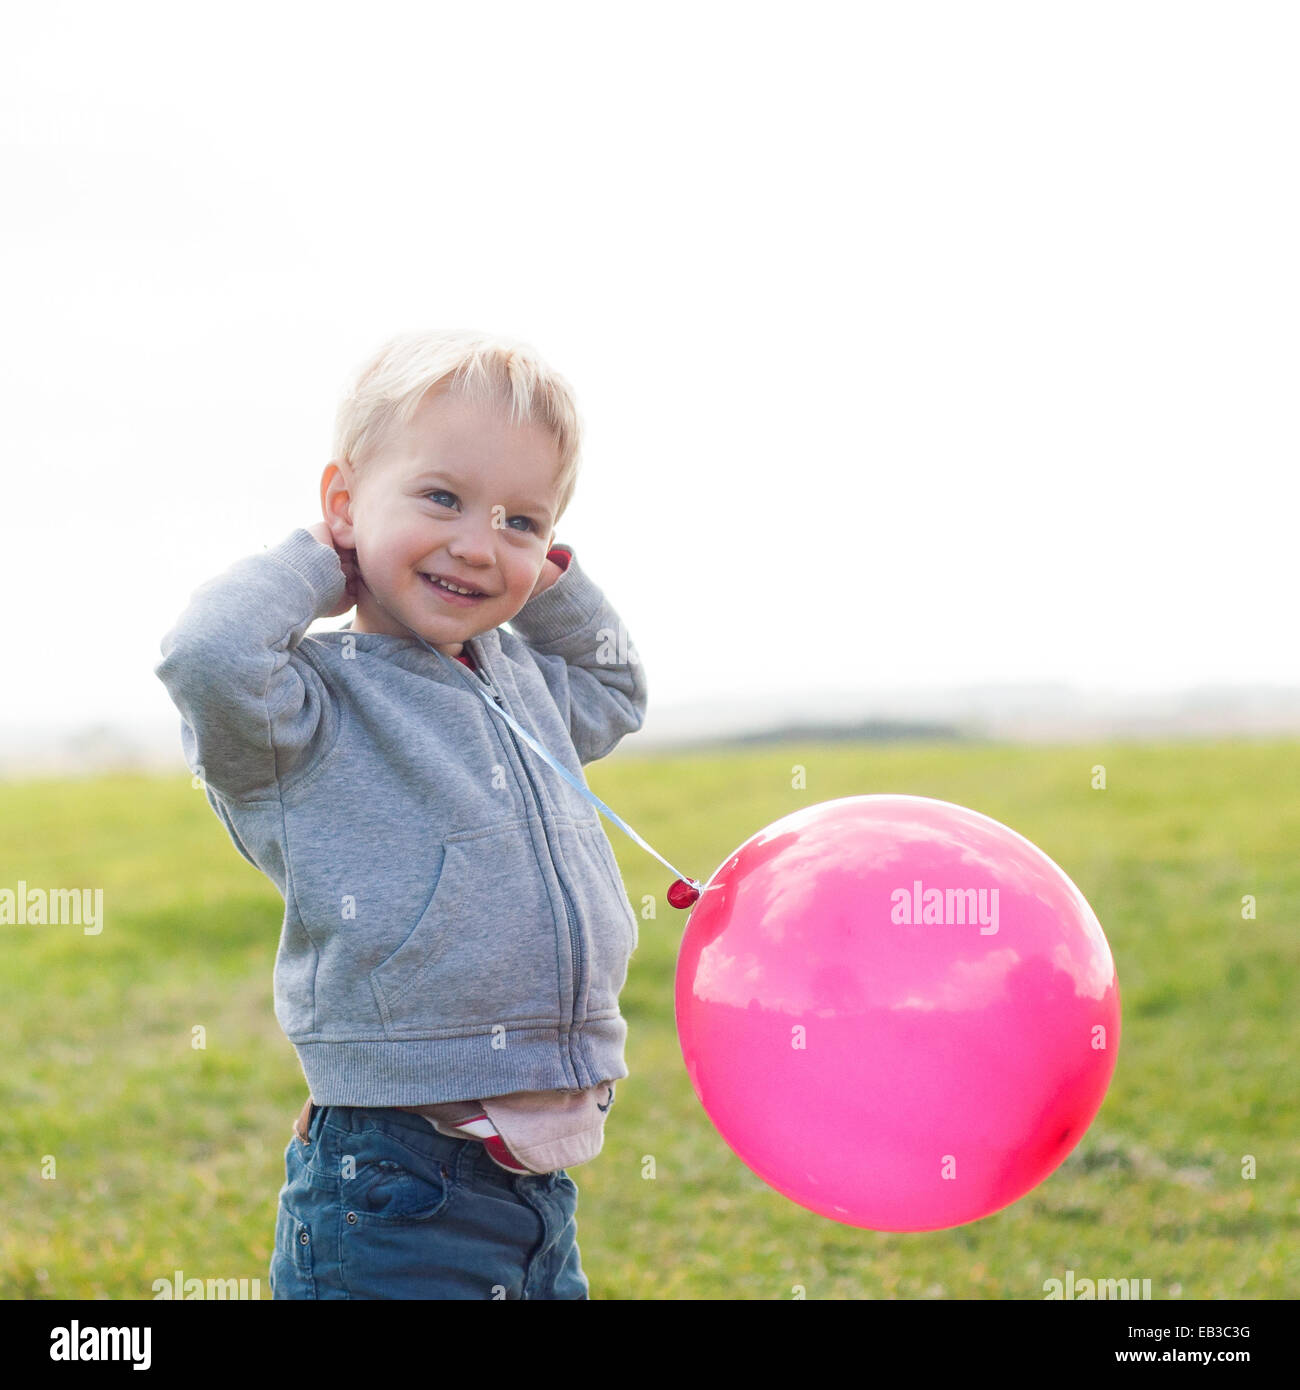 Boy holding a pink balloon Banque D'Images